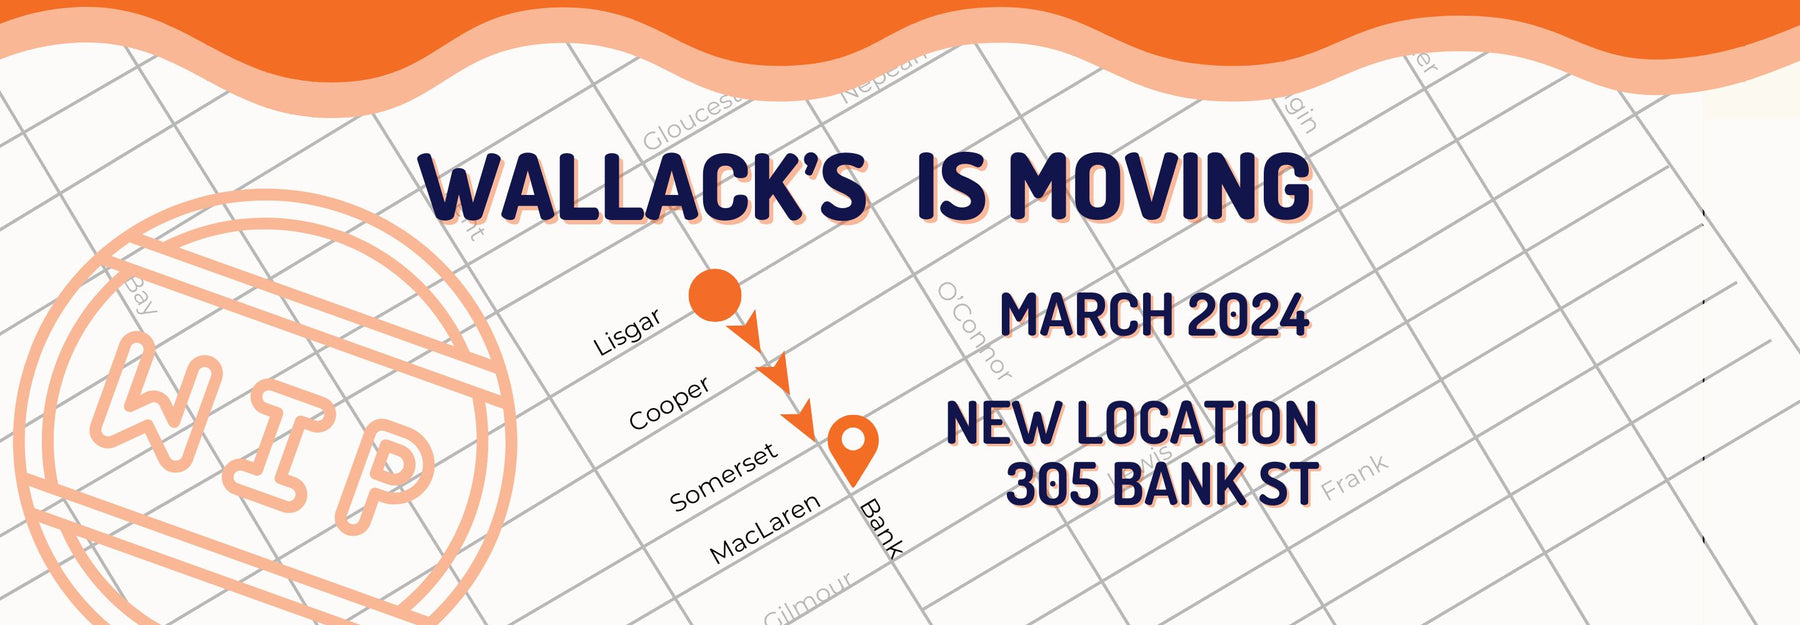 Wallack's moving announcement banner with map of new location three blocks south of existing location. Art Supplies Ottawa Downtown Centretown.